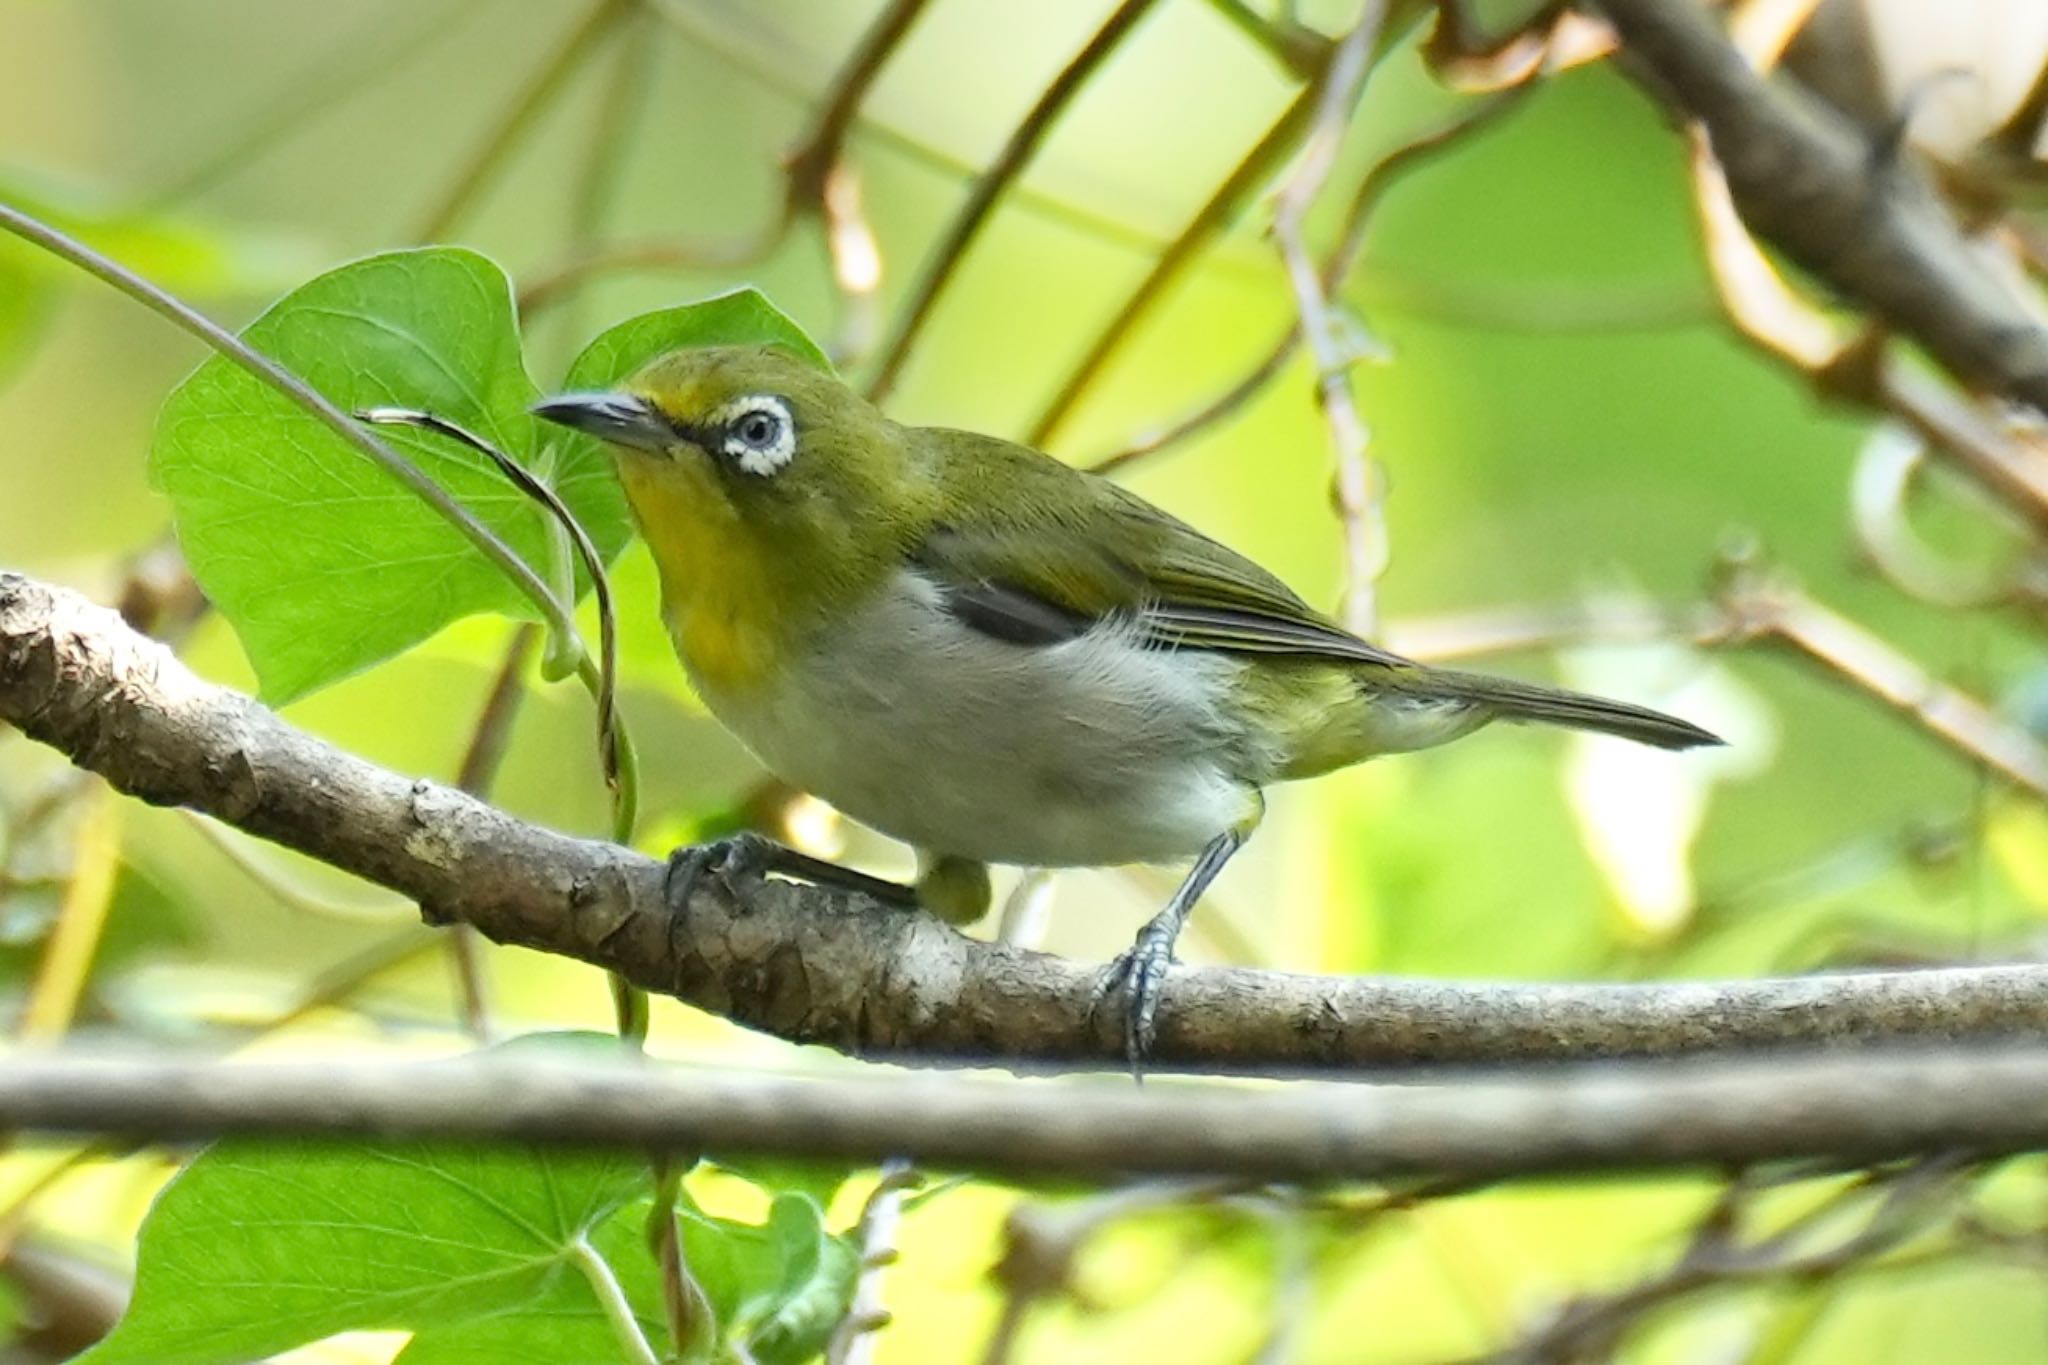 Photo of Japanese White-eye(loochooensis) at Amami Nature Observation Forest by あらどん